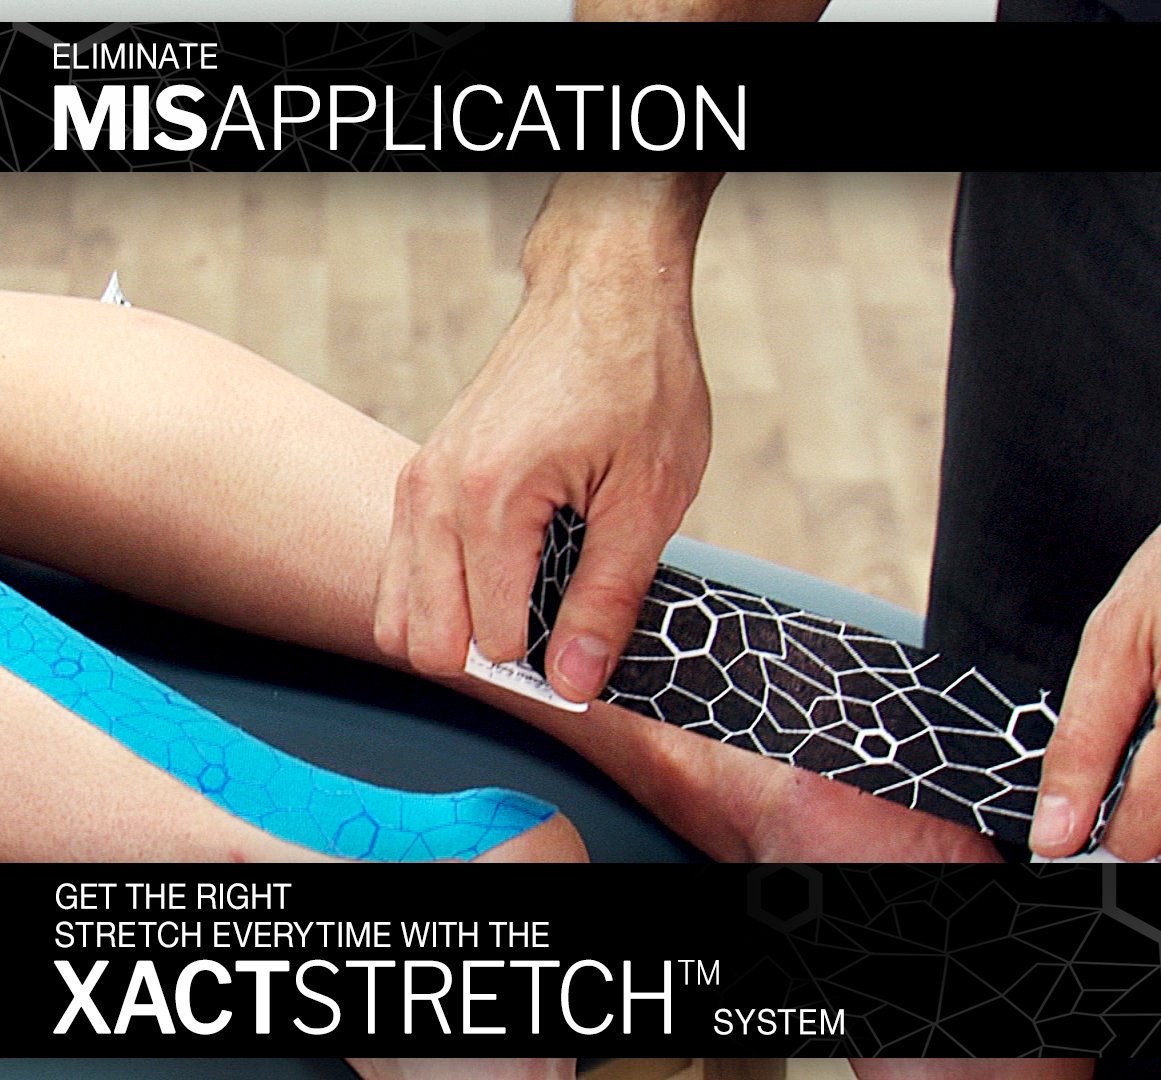 THERABAND Kinesiology Tape with XactStretch Indicator for Perfect Stretch and Application Every Time, Best in Class Adhesion, Water Resistant